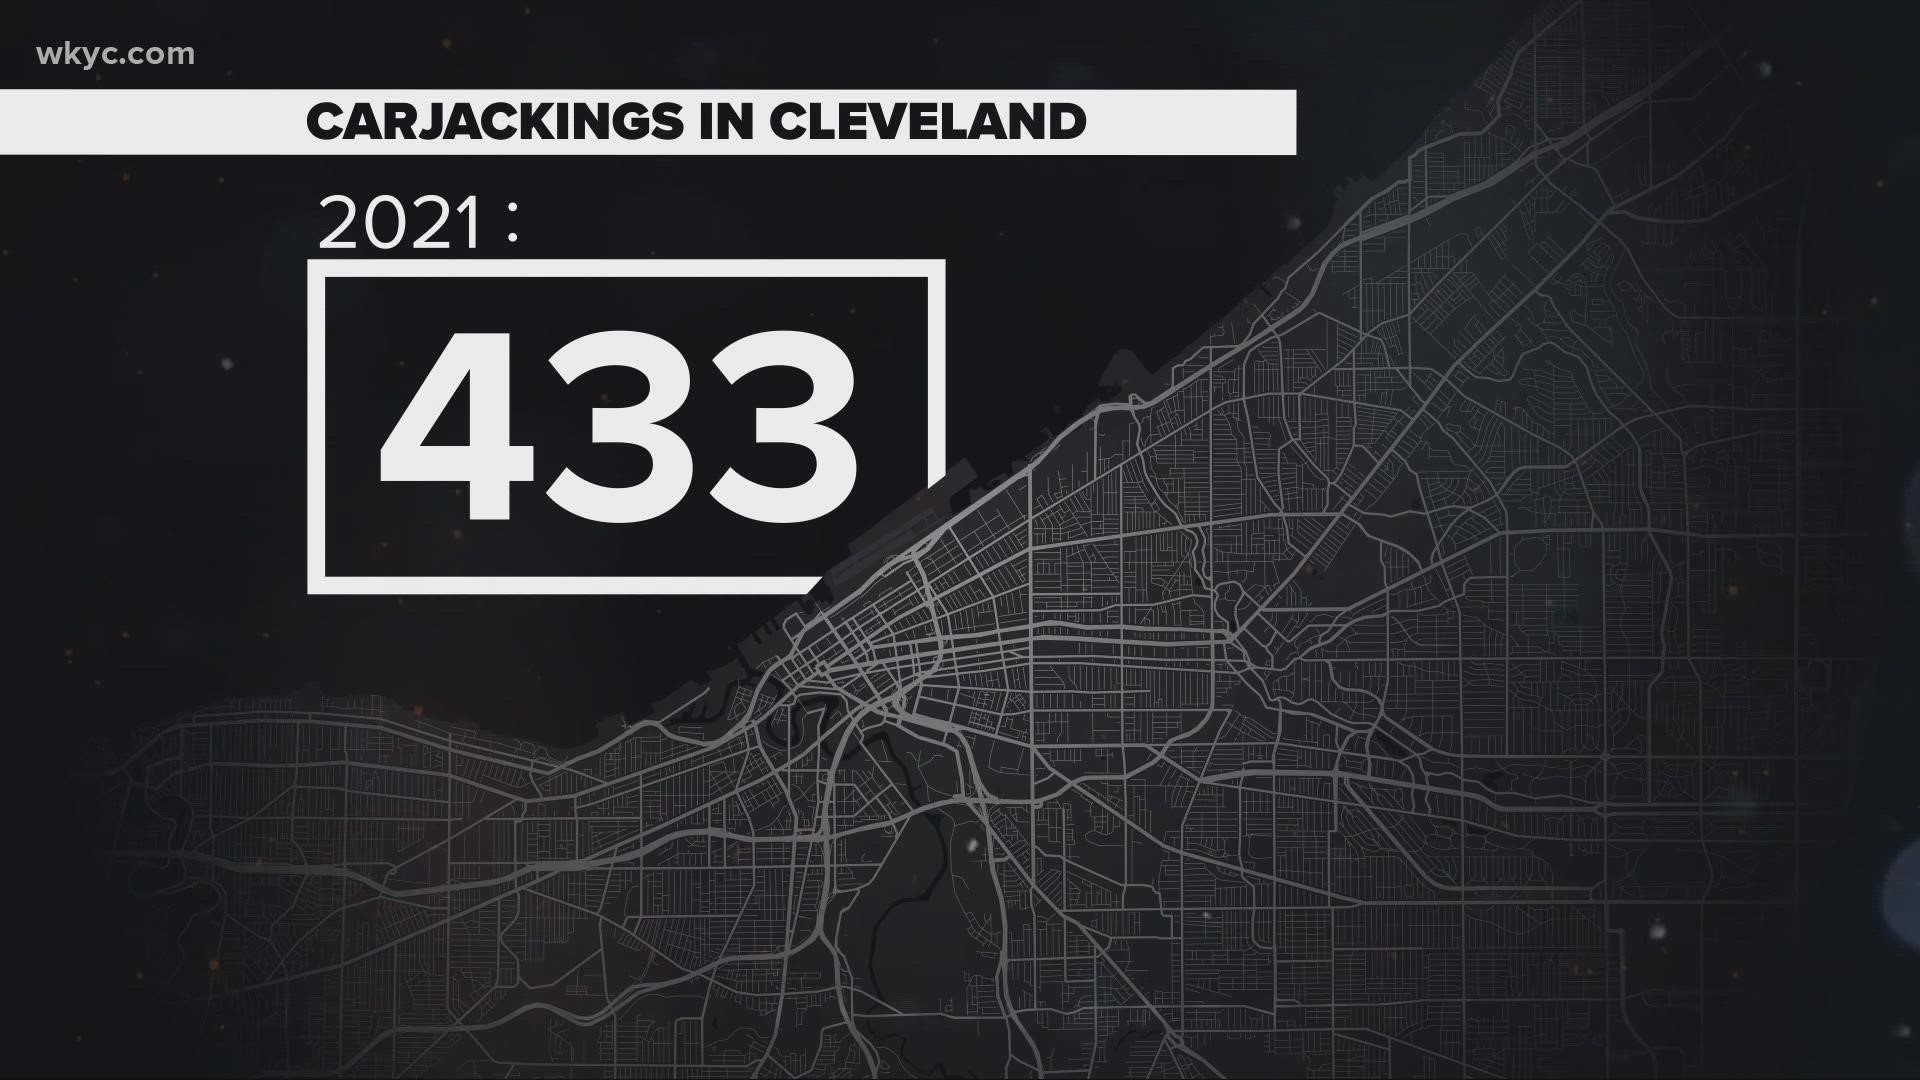 The Cuyahoga County Prosecutor's Office reports a 50% spike in vehicle thefts over just two years.